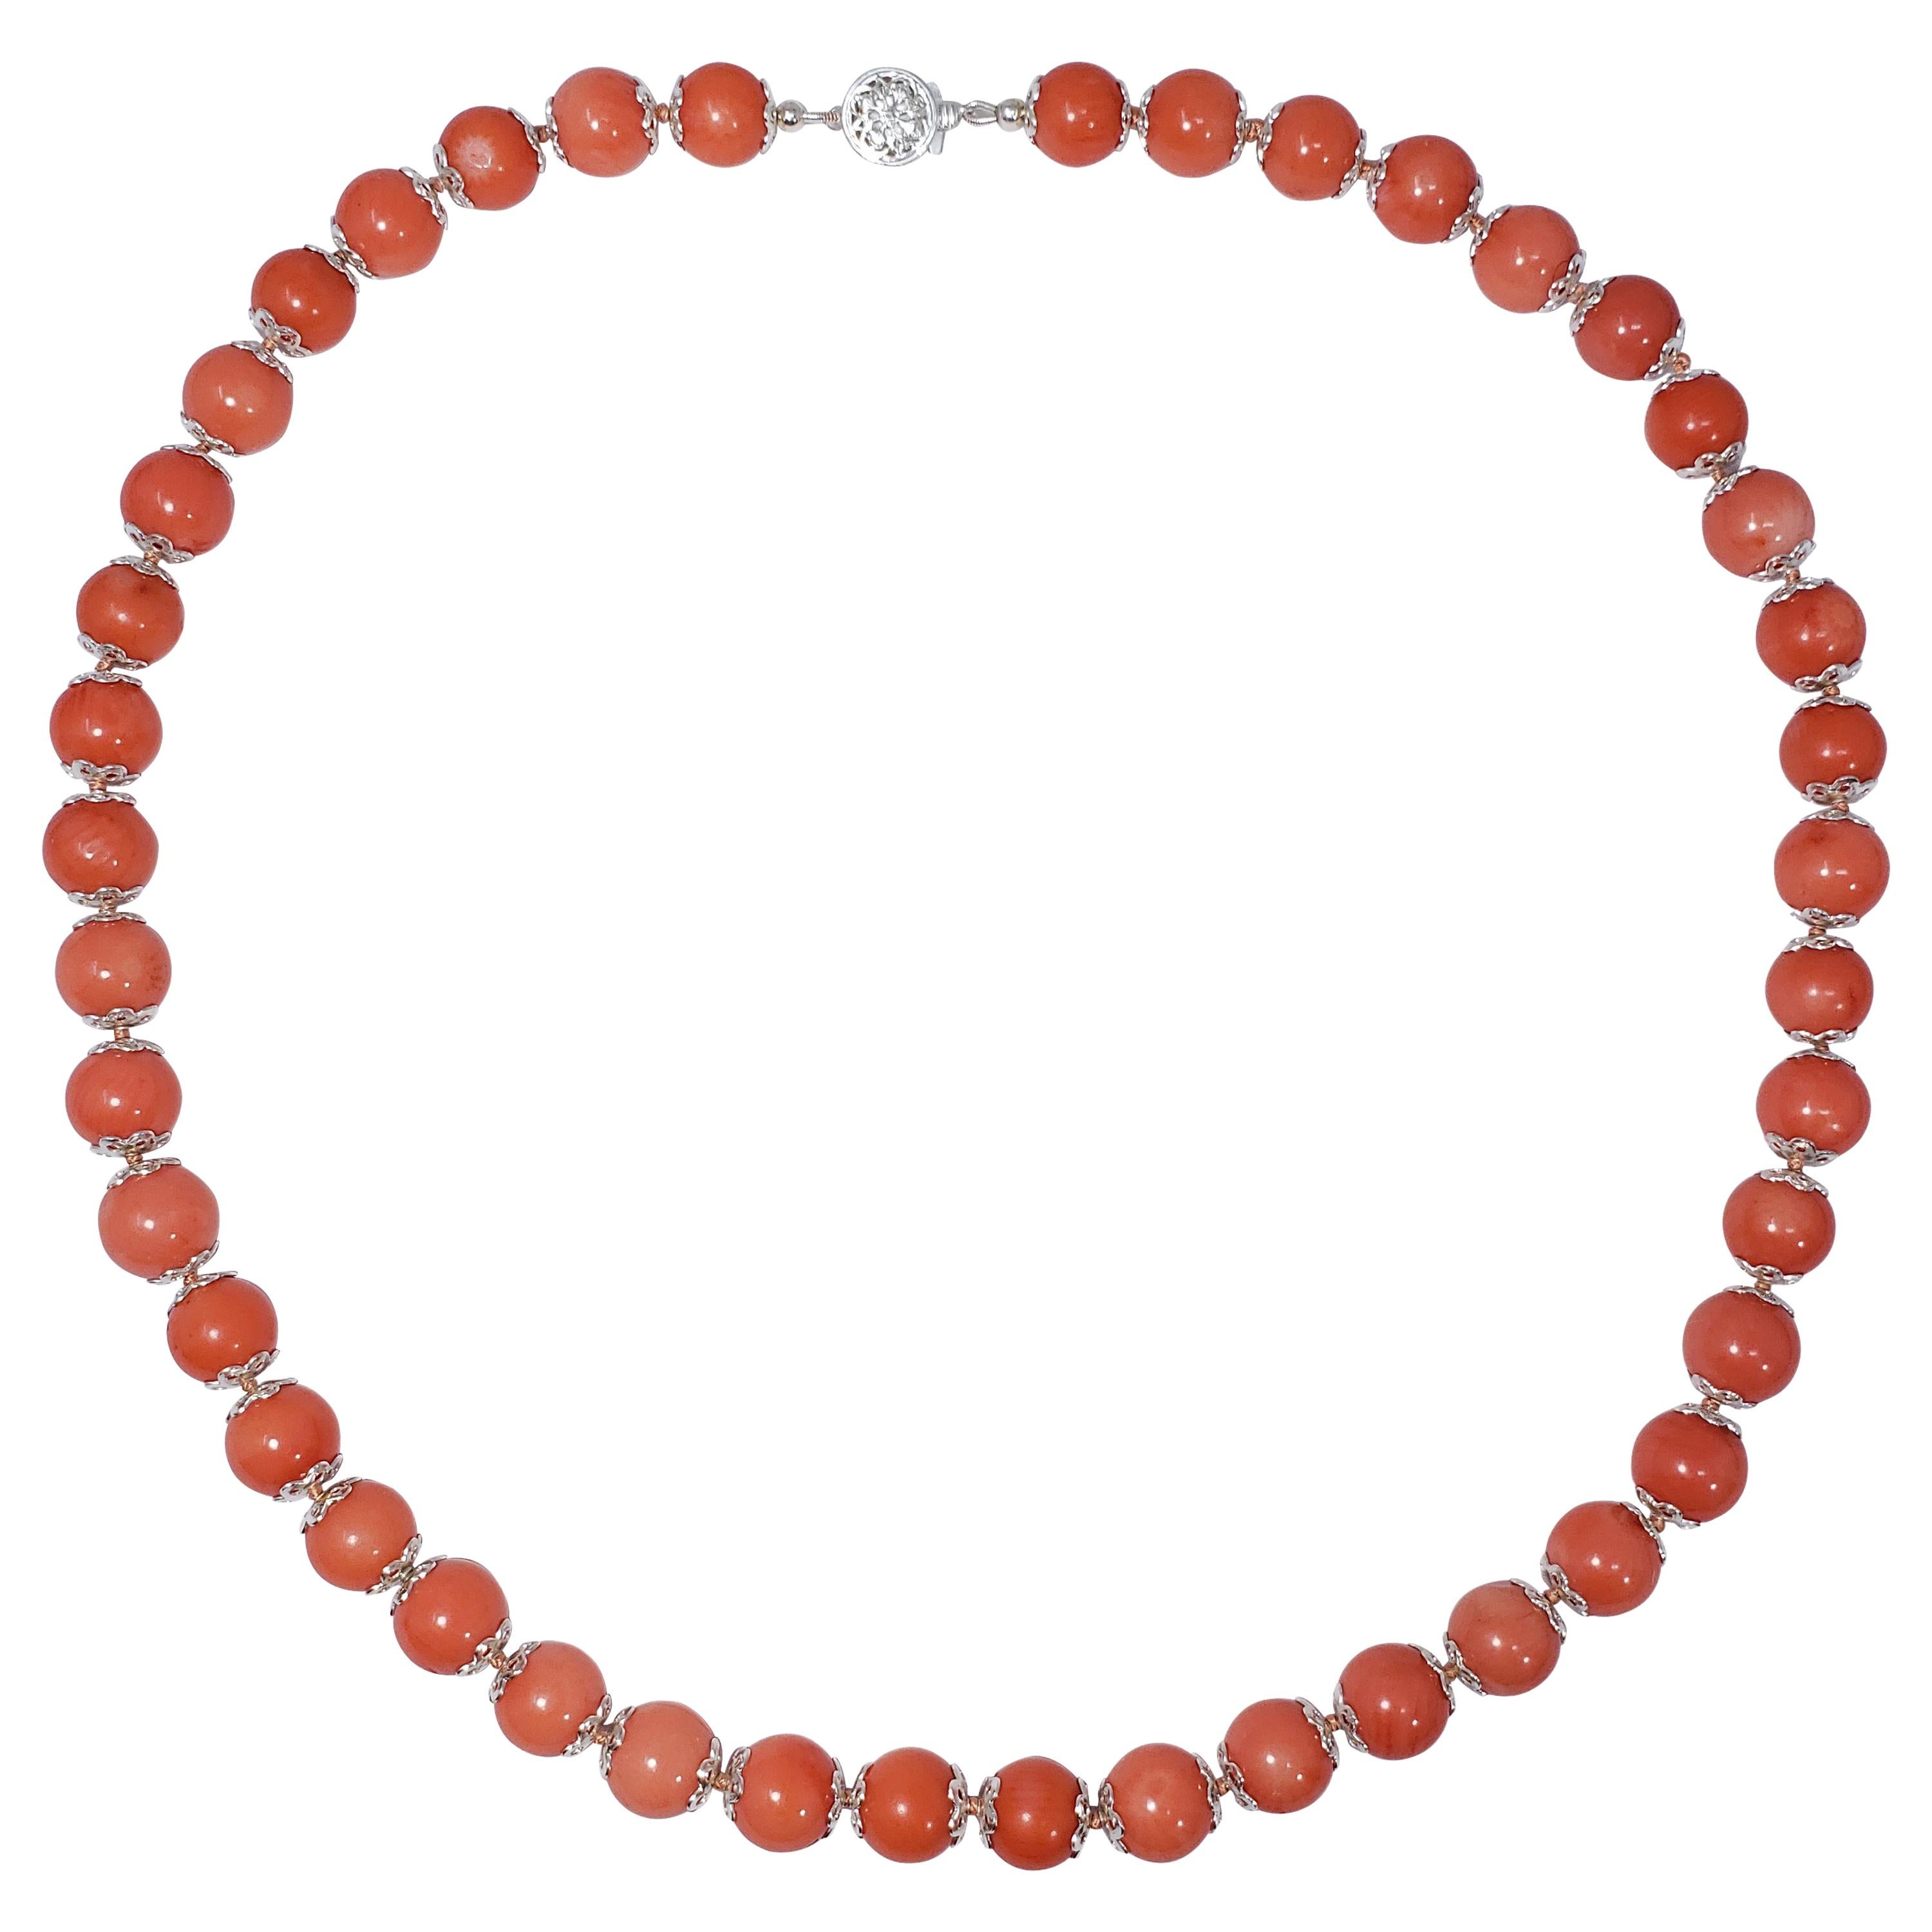 Salmon Coral Bead Knotted String Silver Accent Necklace, 50 cm, Sterling Silver For Sale